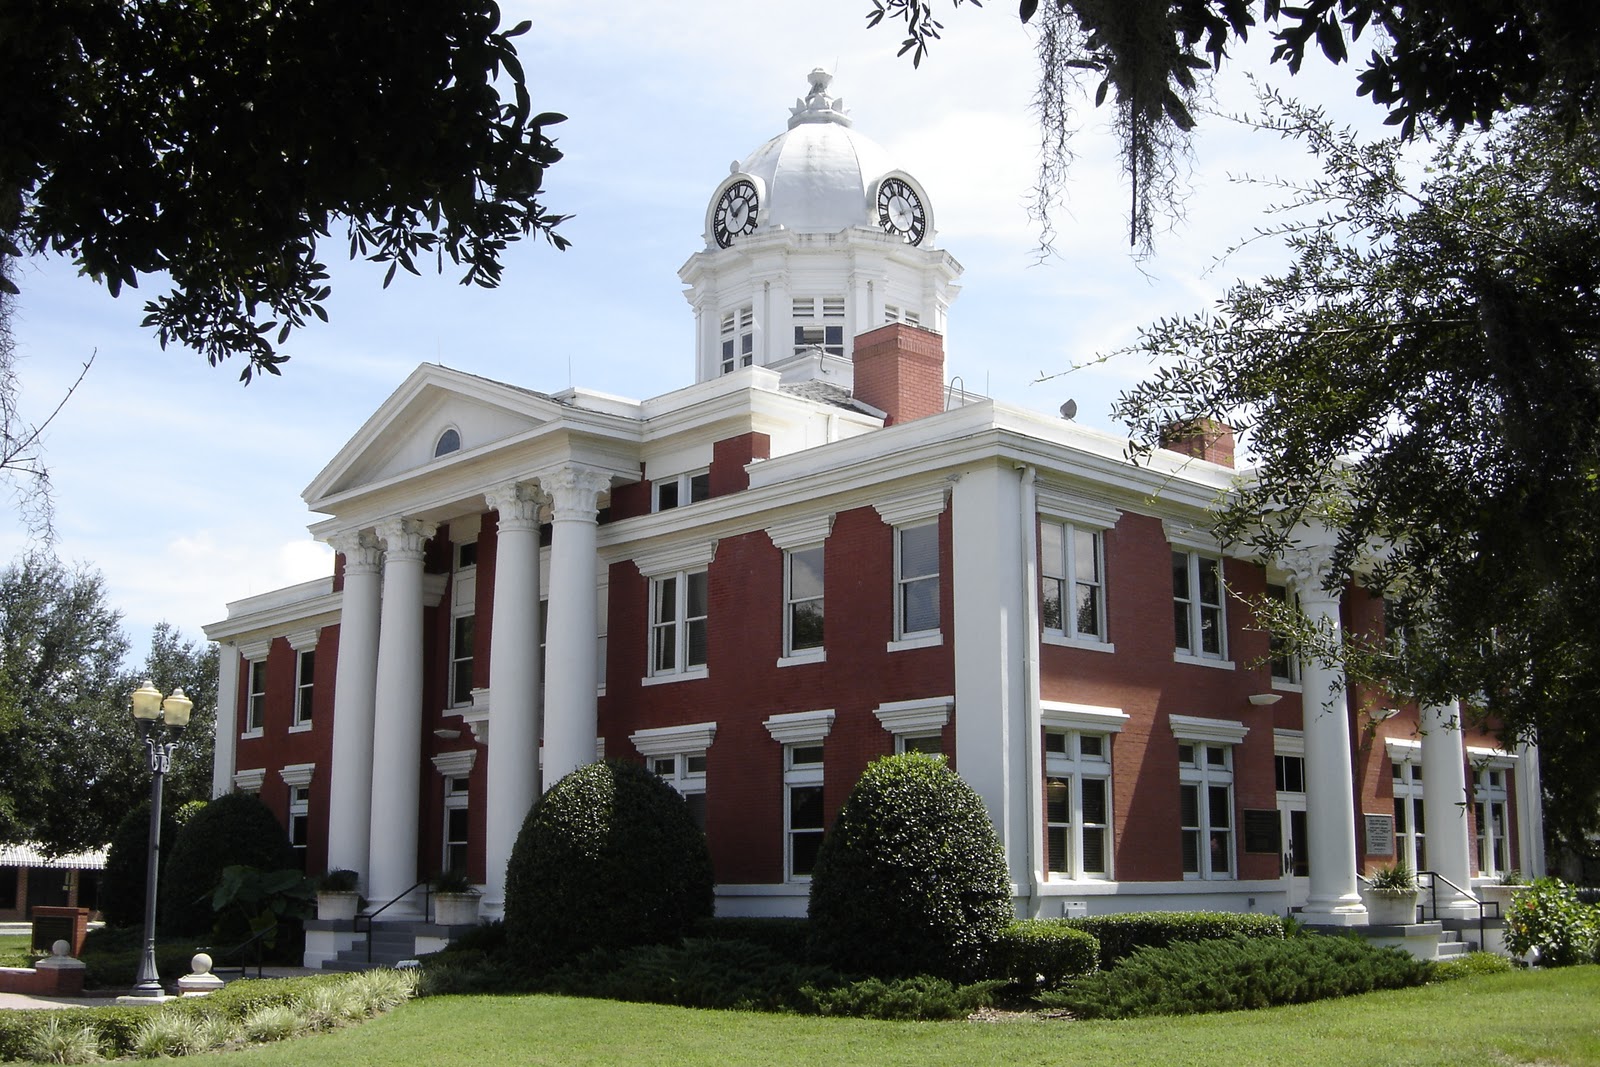 Places To Go, Buildings To See: Pasco County Courthouse - Dade City